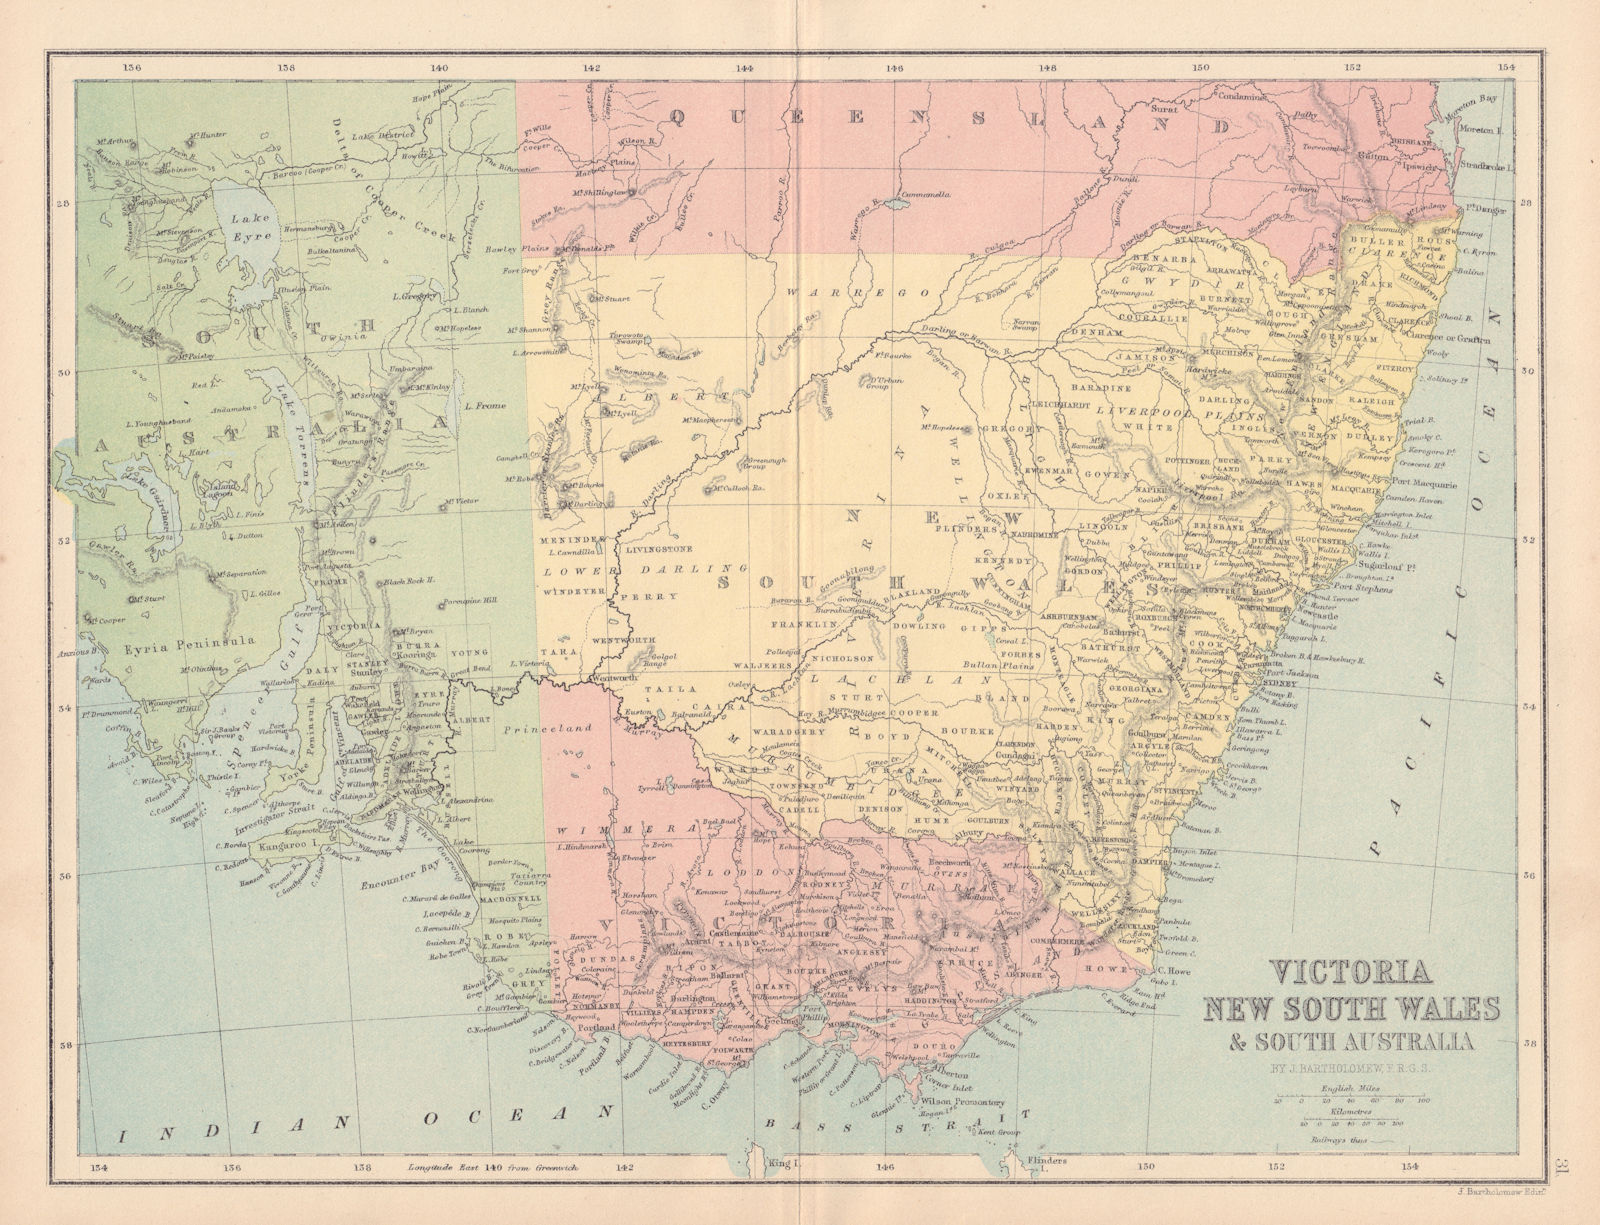 Associate Product Victoria, New South Wales & South Australia. COLLINS 1873 old antique map